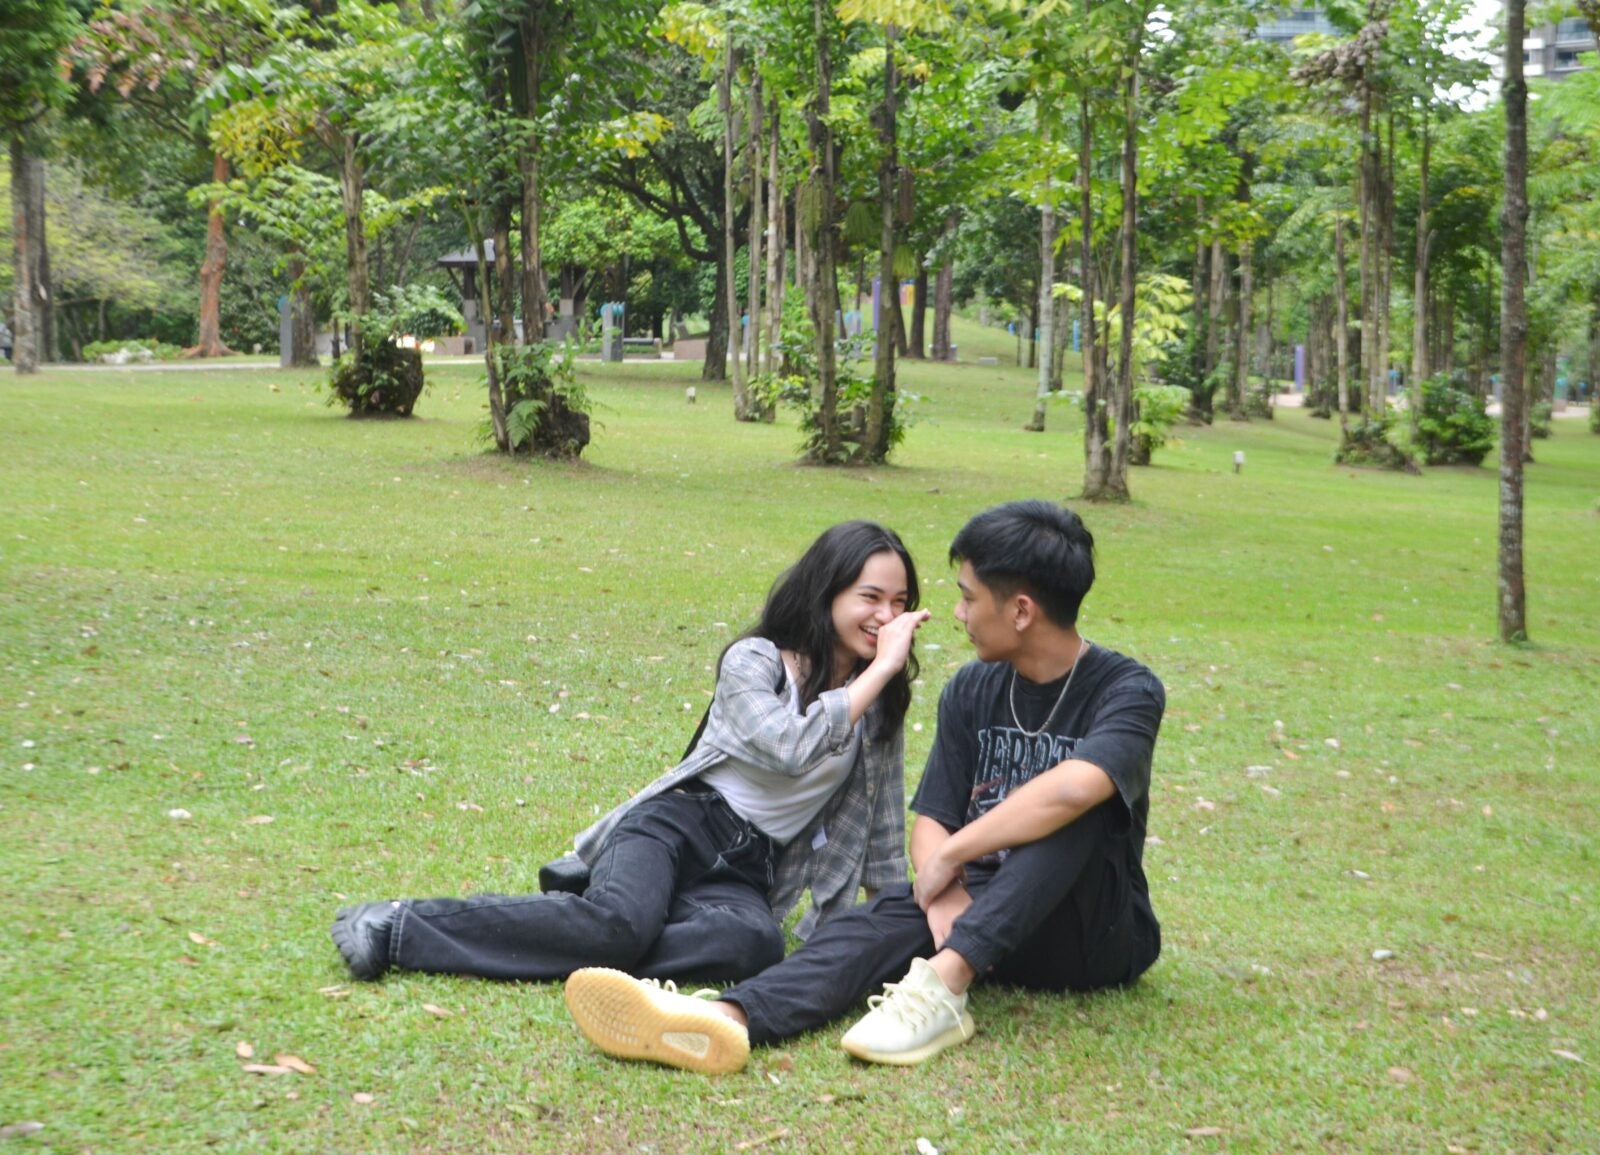 A Malay Couple sitting on the grass at KLCC park, laughing as the girl reaches for the boy